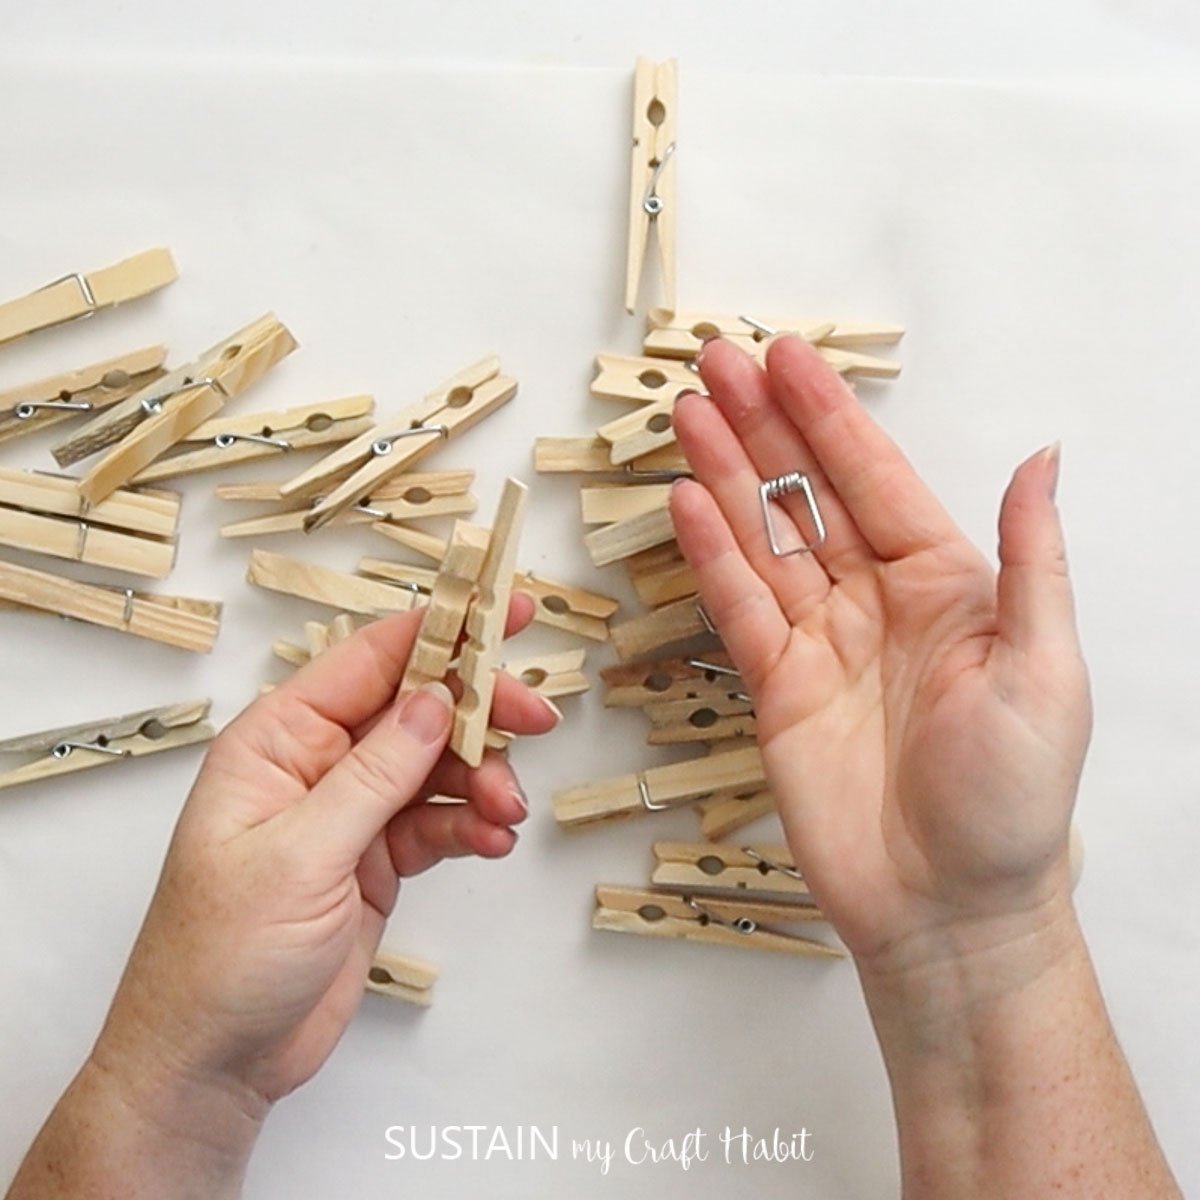 Removing metal springs from the clothespins.